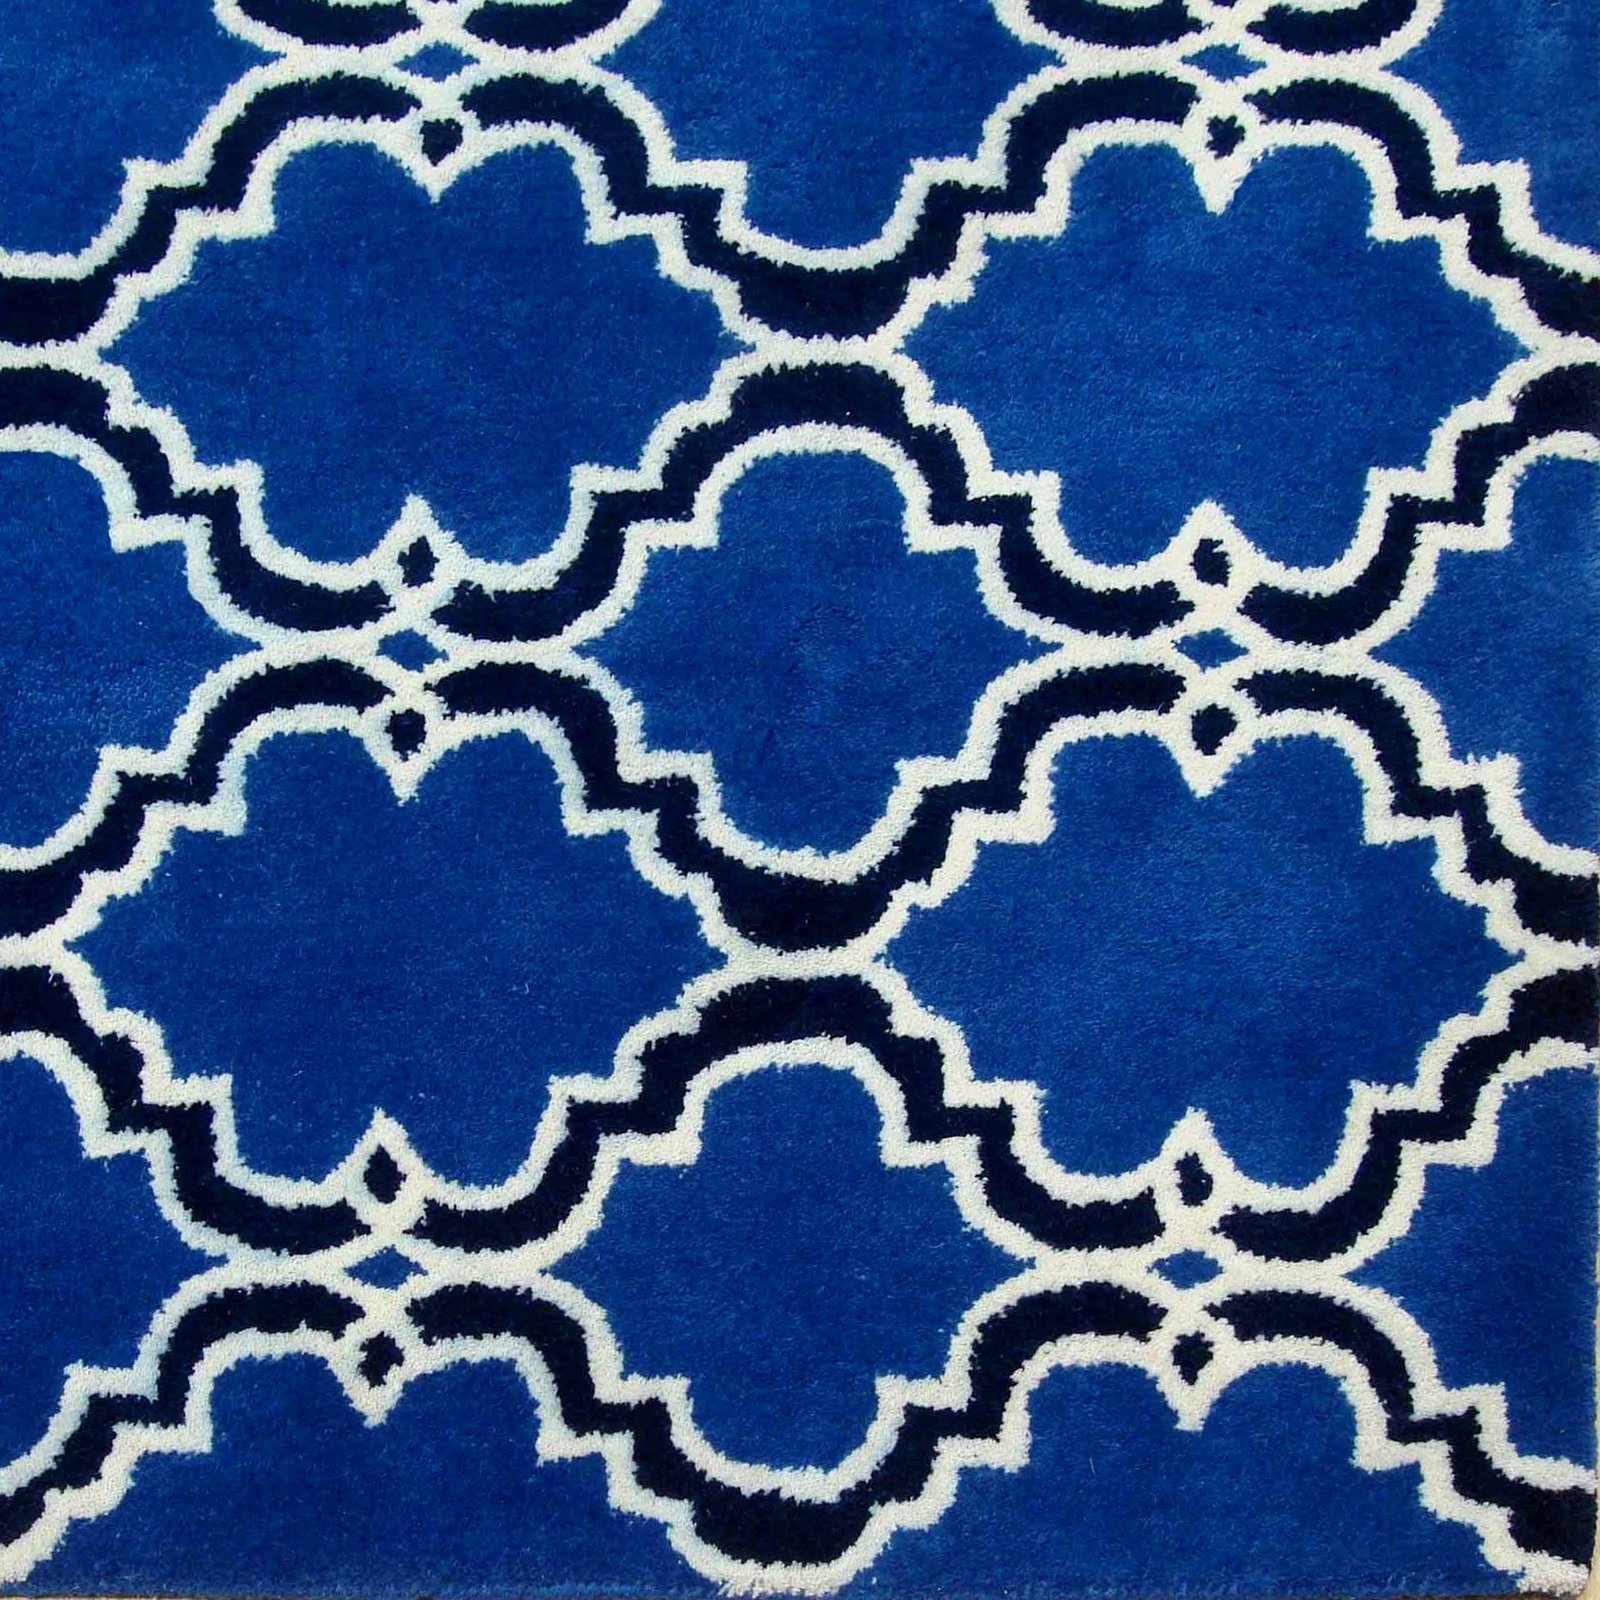 Primary image for Moroccan Scroll Tile Indigo Handmade Persian Style Woolen Area Rug - 4' x 6'